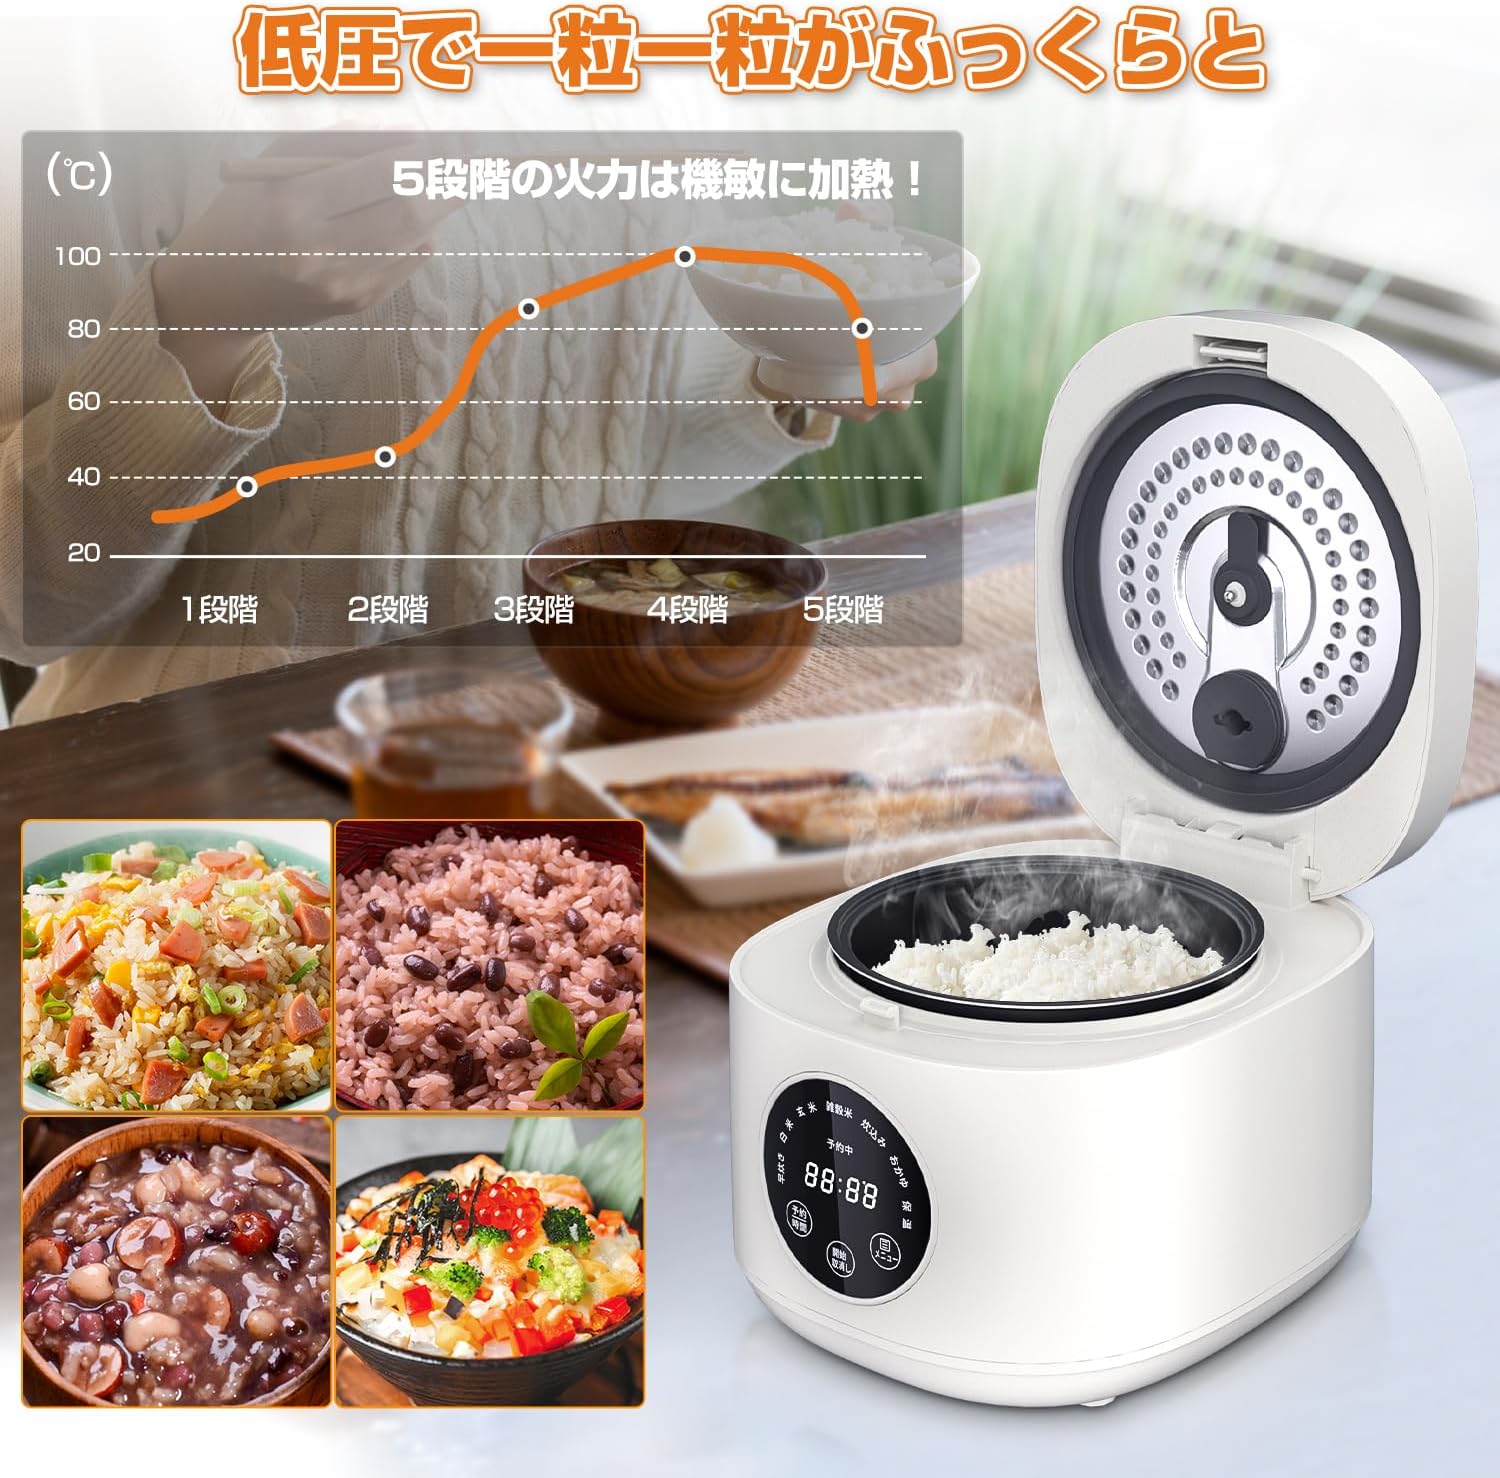 Rice cooker 炊飯器 5.5 cups